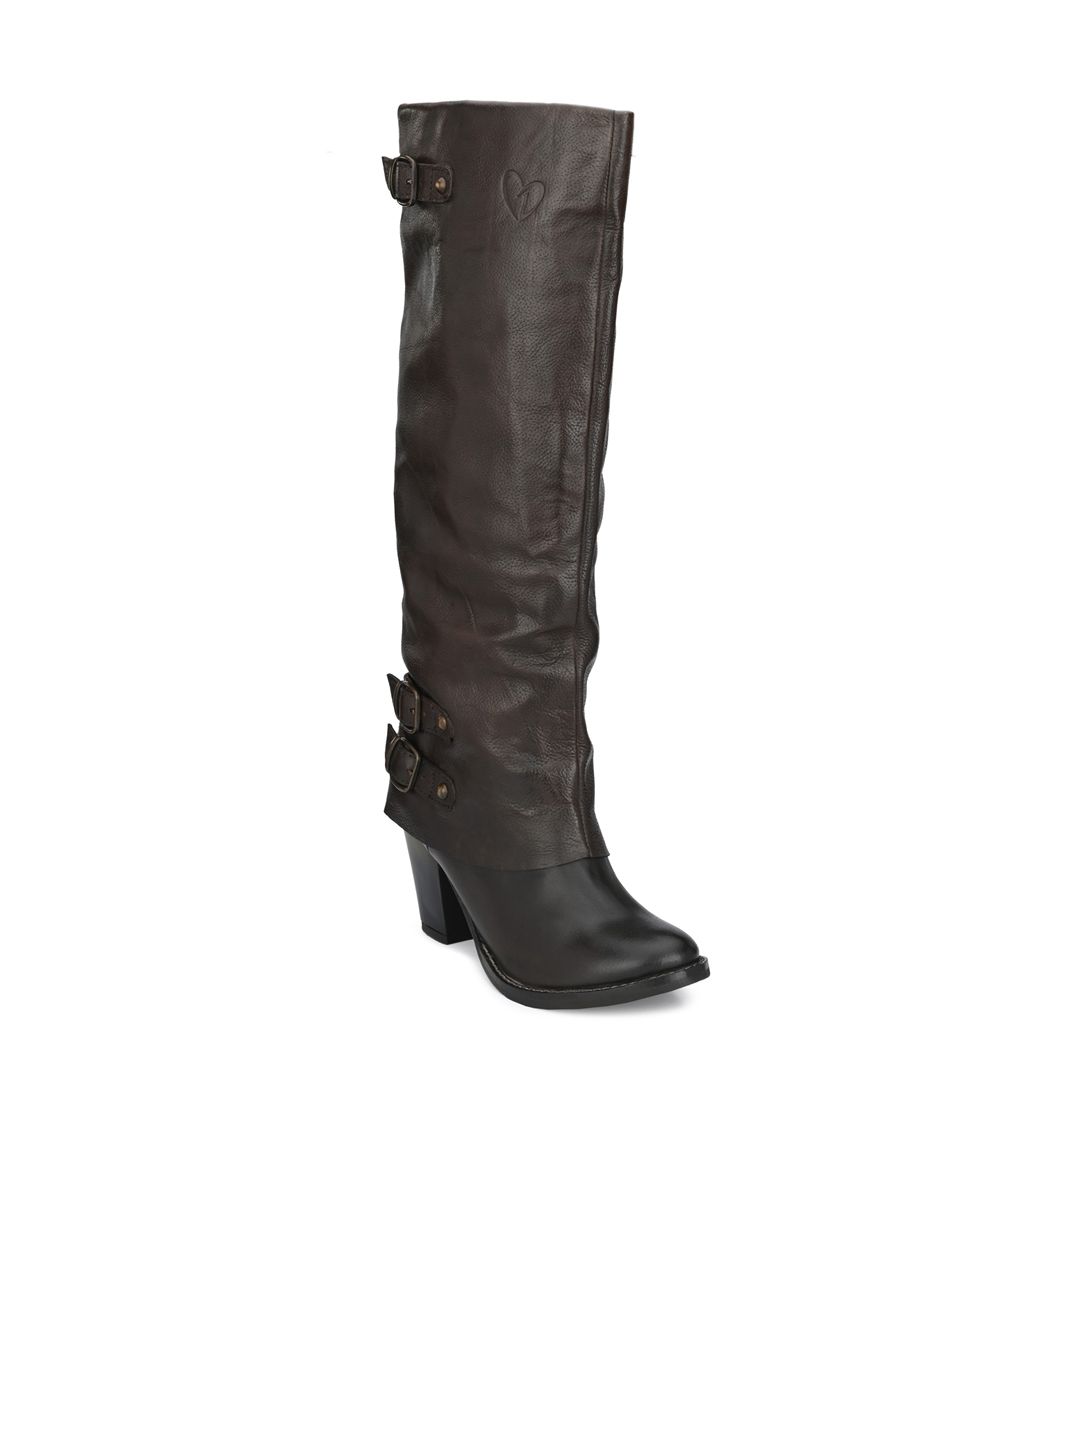 Delize Brown Leather Block Heeled Boots with Buckles Price in India